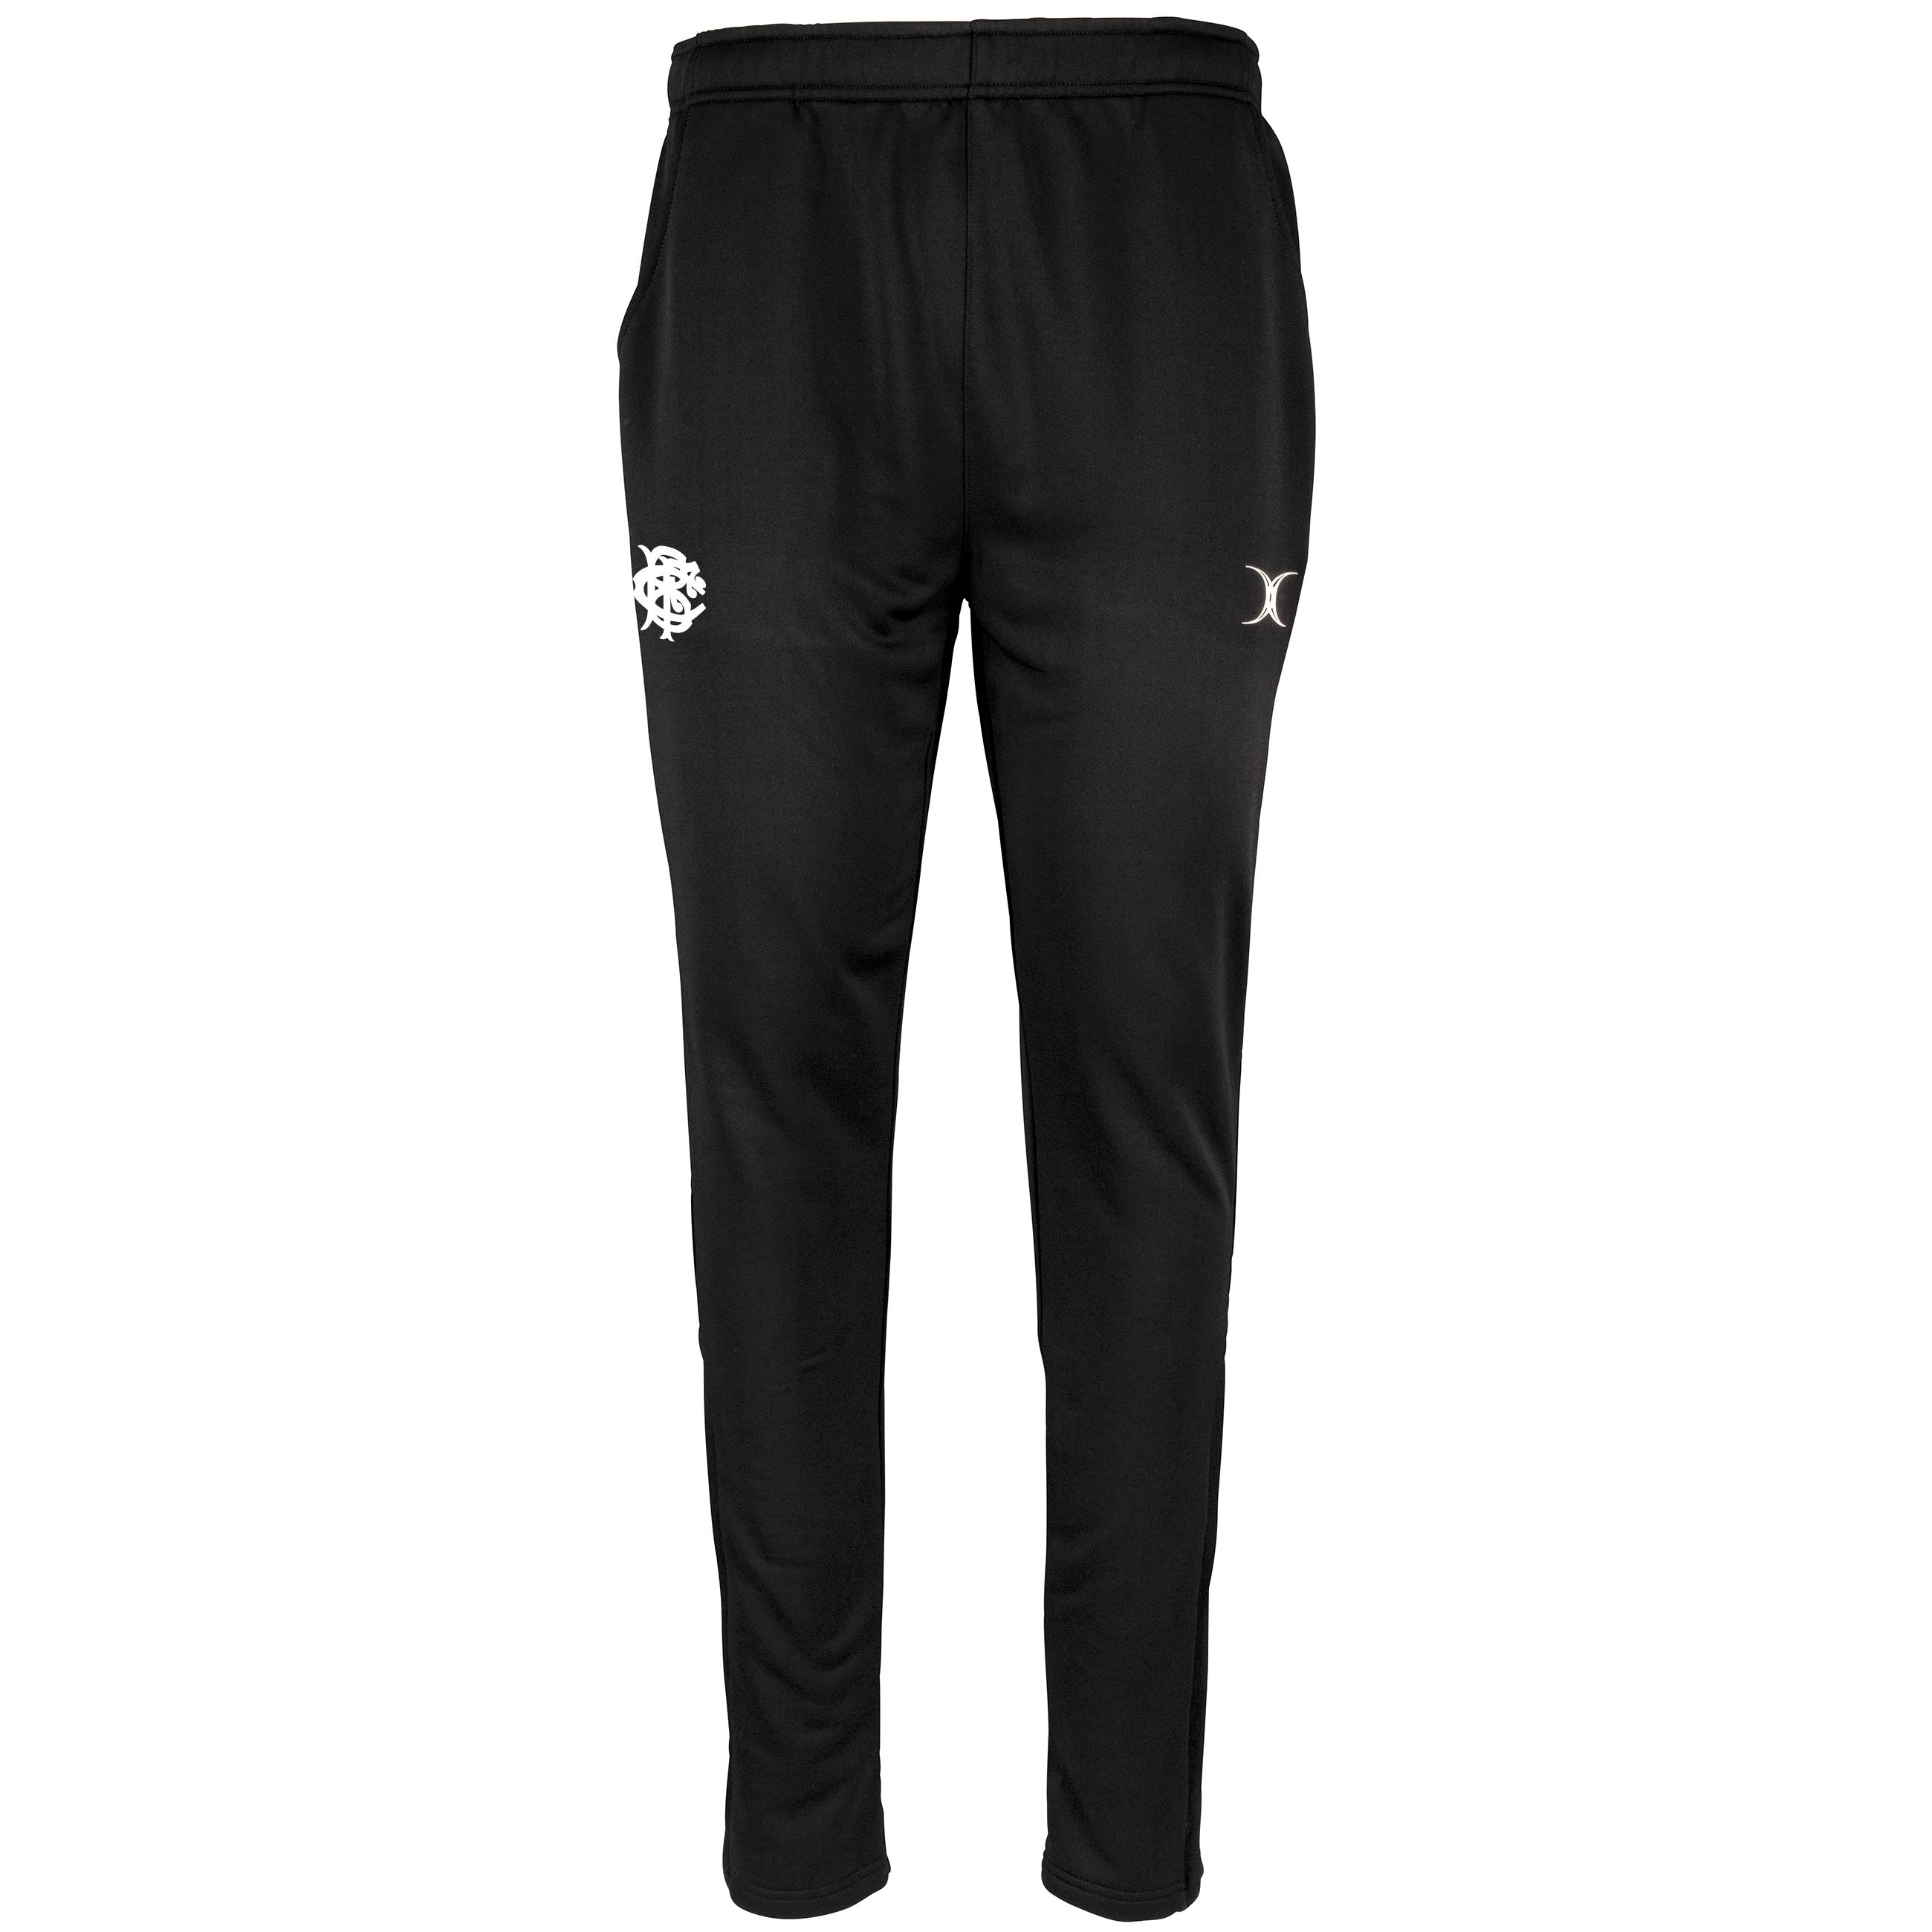 Barbarian FC Child's Training Trousers - Black